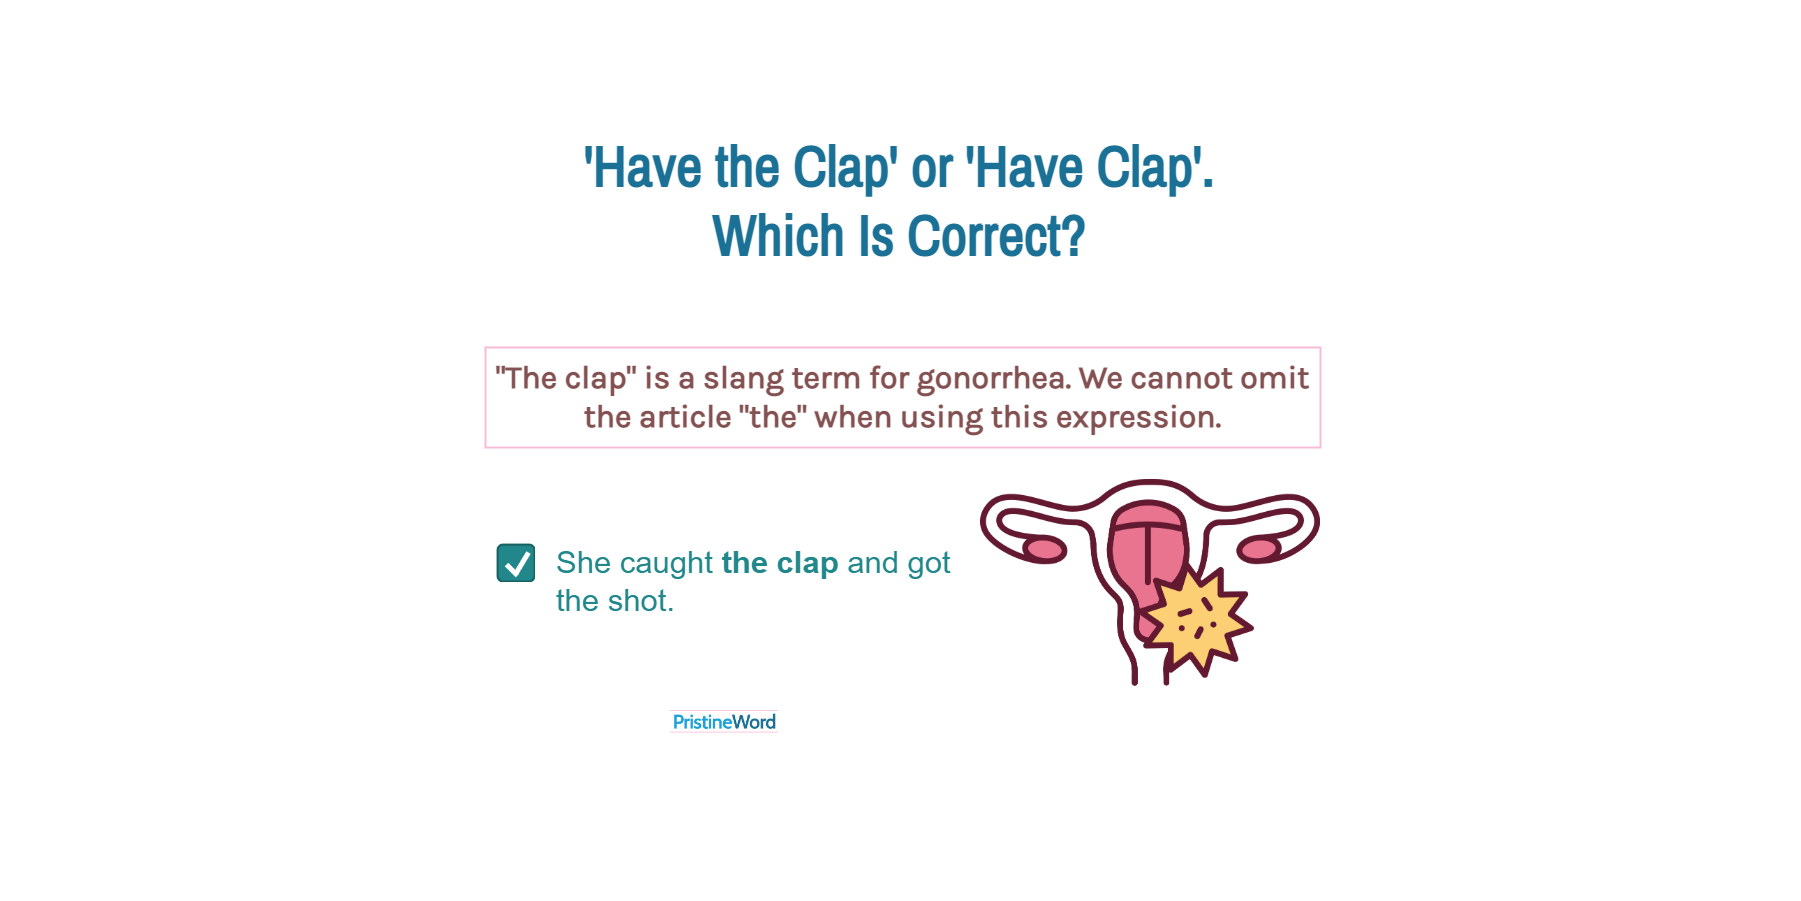 Have the Clap or Have Clap. Which is Correct?